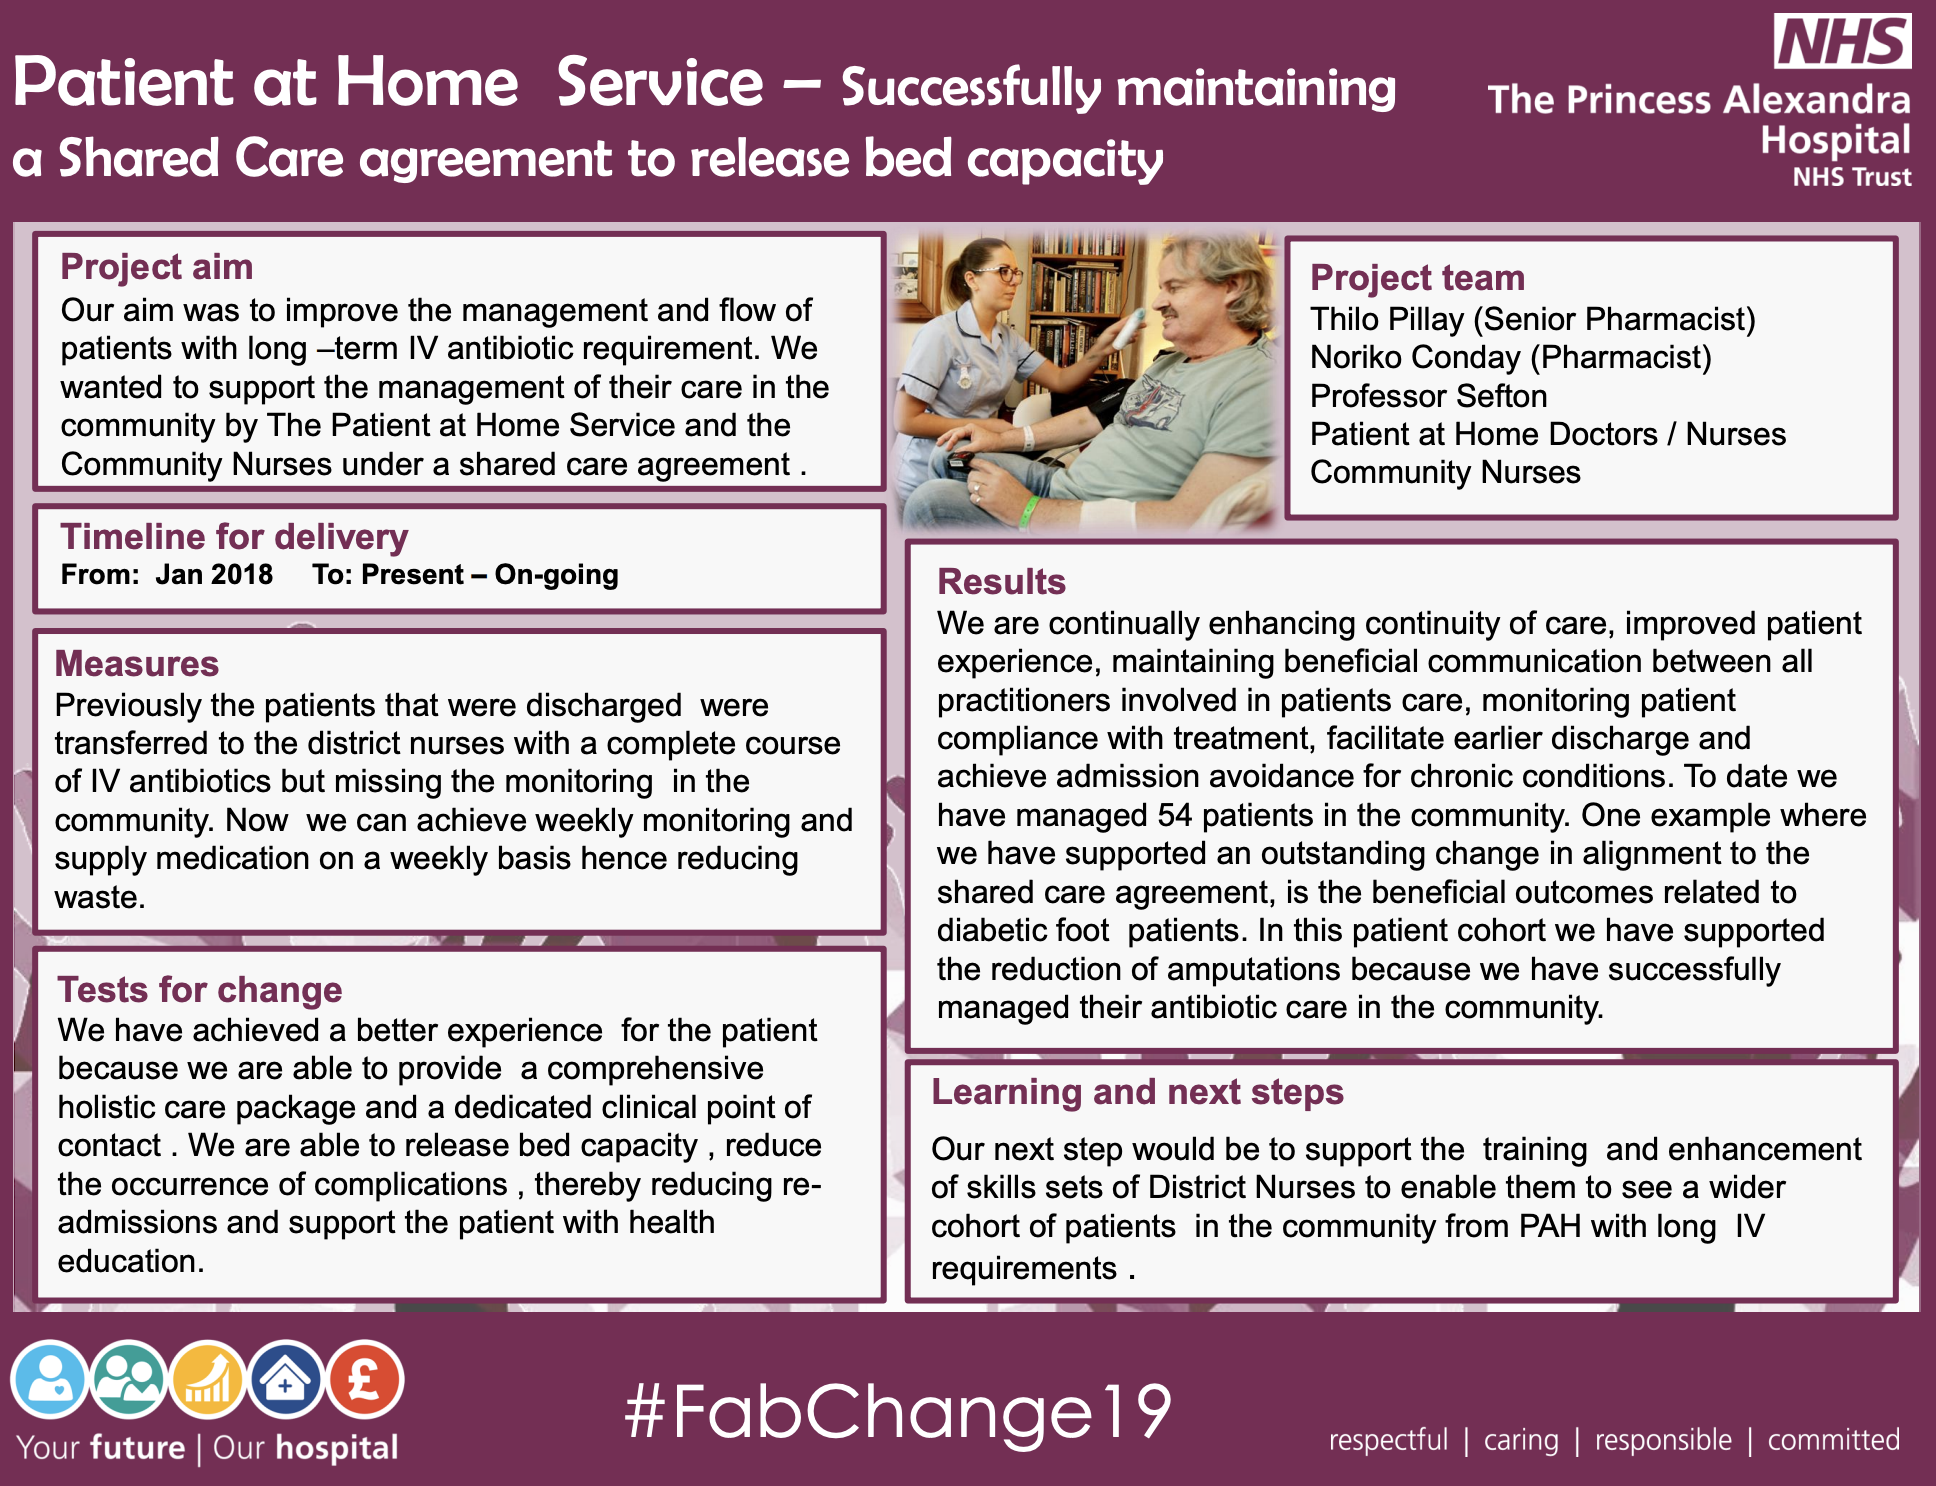 Patient at Home Service - Successfully maintaining a shared care agreement to release bed capacity - @QualityFirstPAH featured image